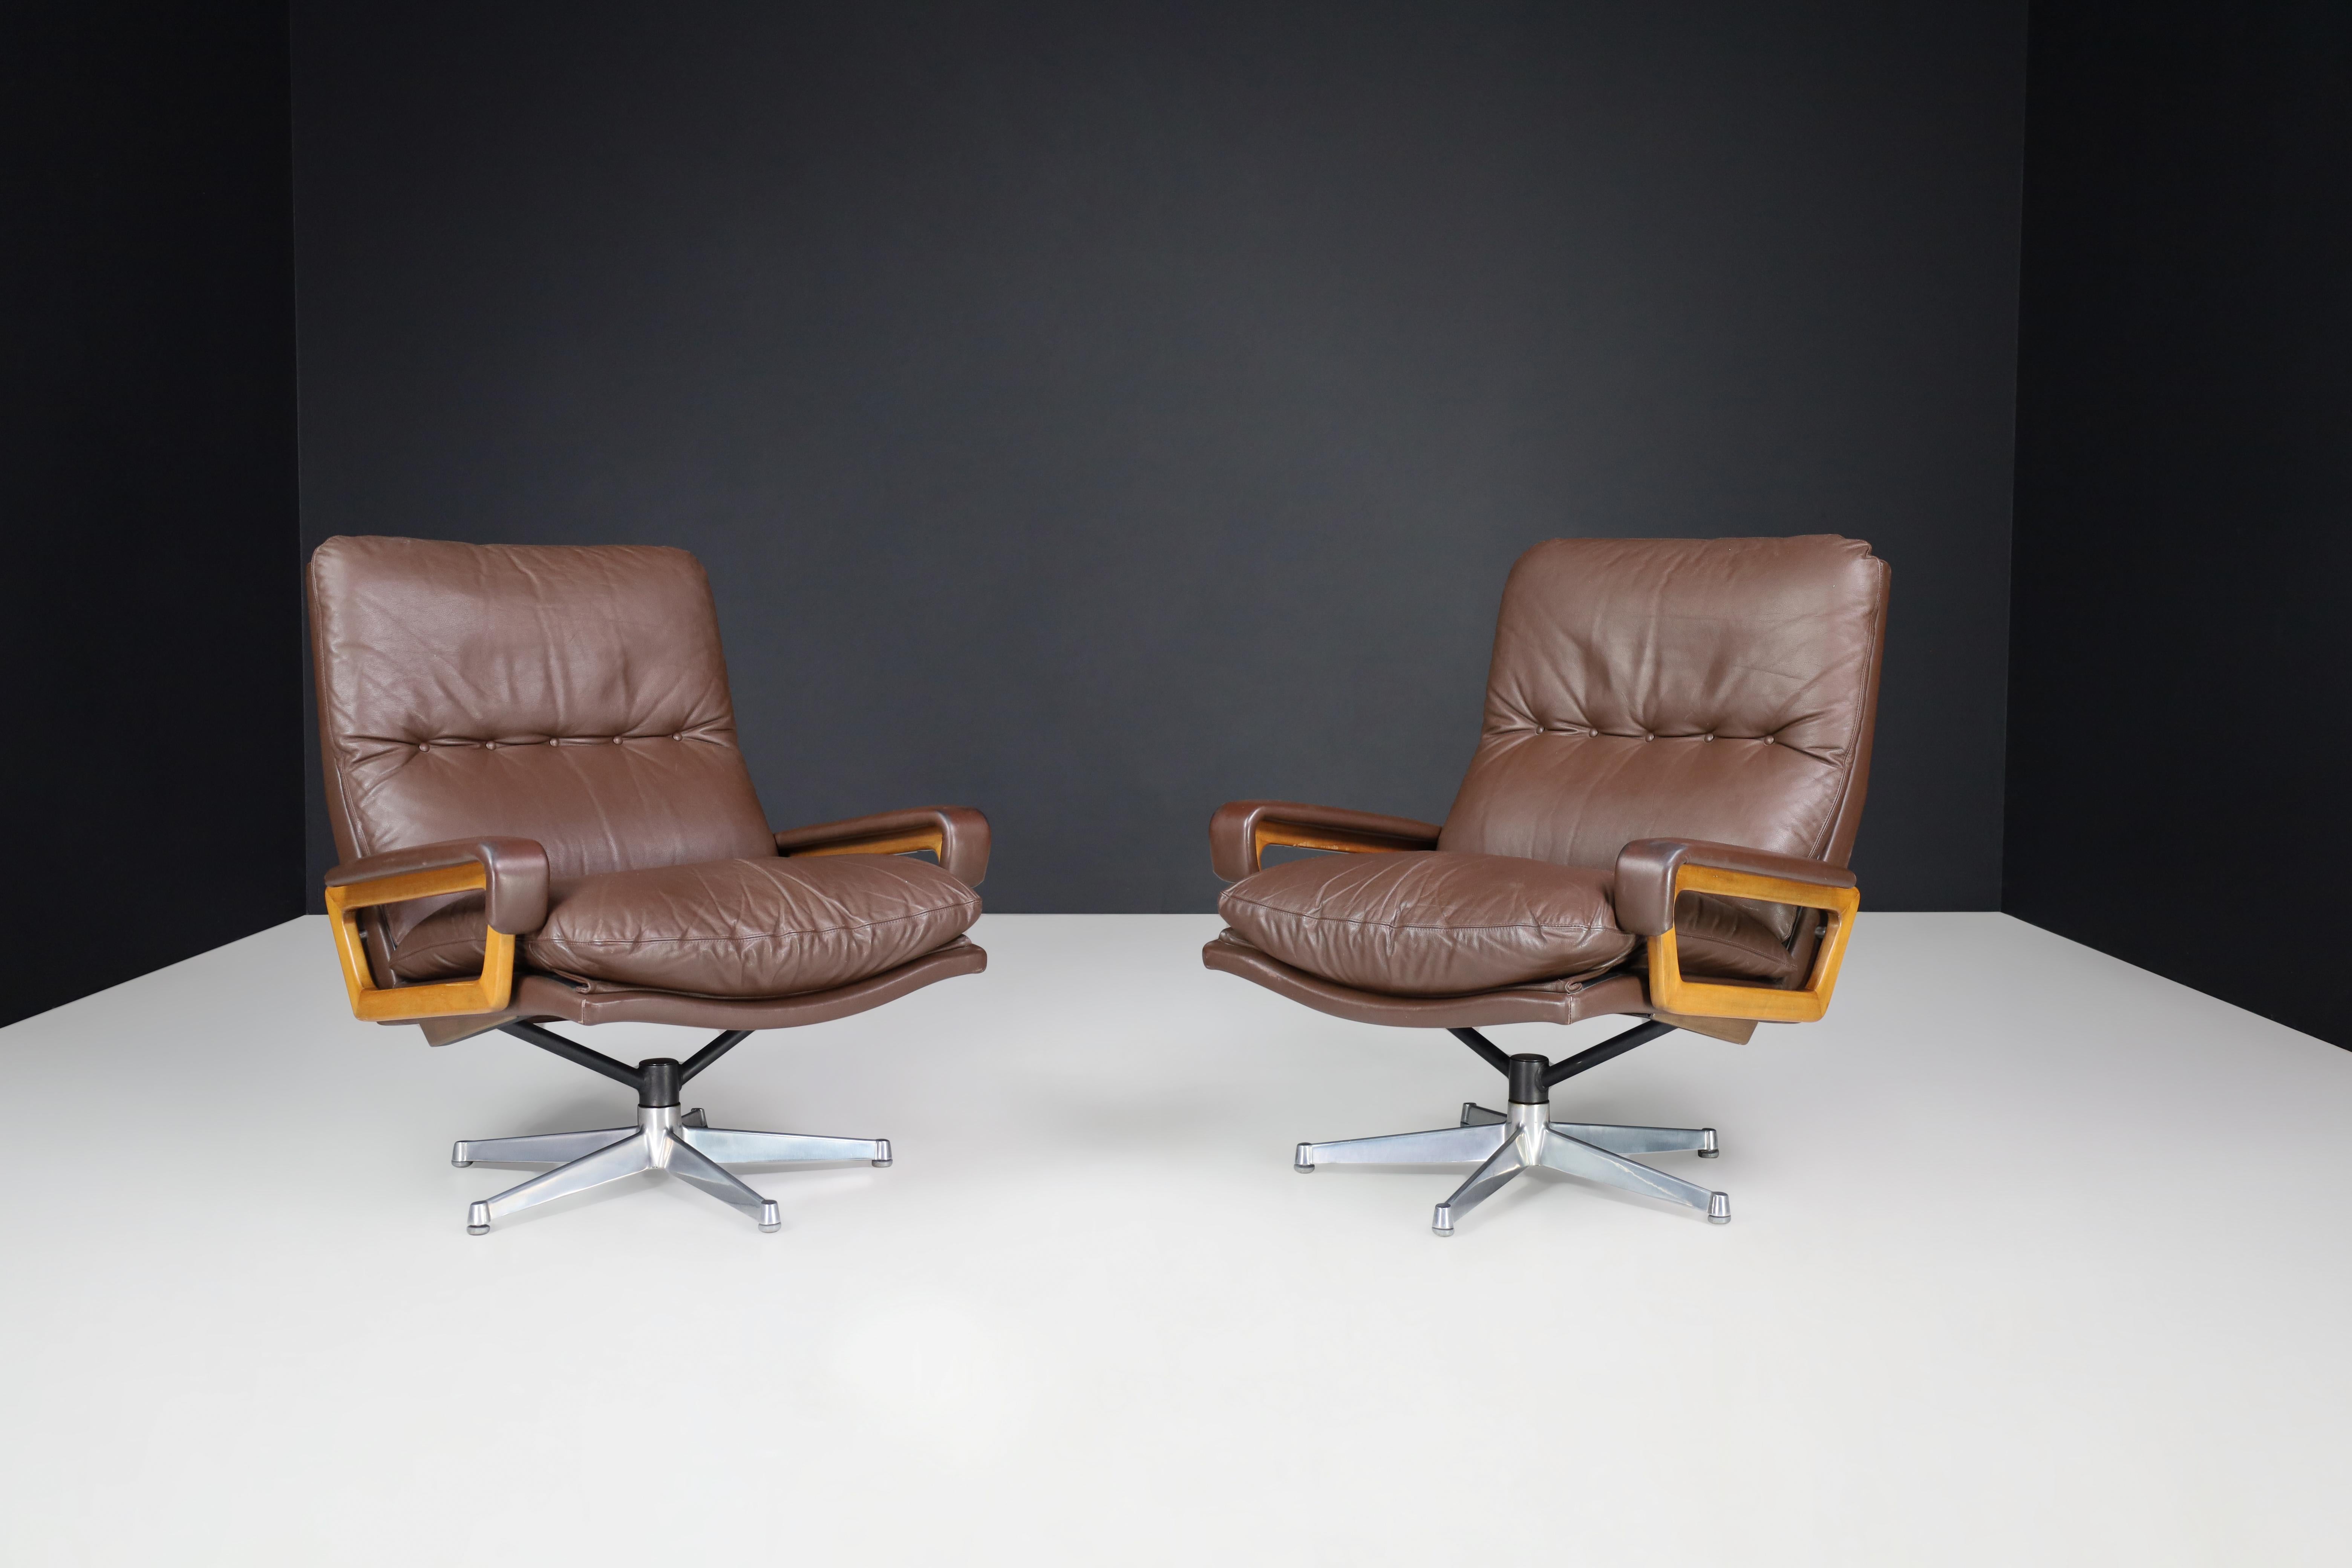 'King' Chairs by André Vandenbeuck for Strässle, Switzerland, 1970s.

These fine leather 'King' model lounge chairs were made by Strässle and designed by André Vandenbeuck in Switzerland in the 1970s. These chair has wooden armrests and stands on